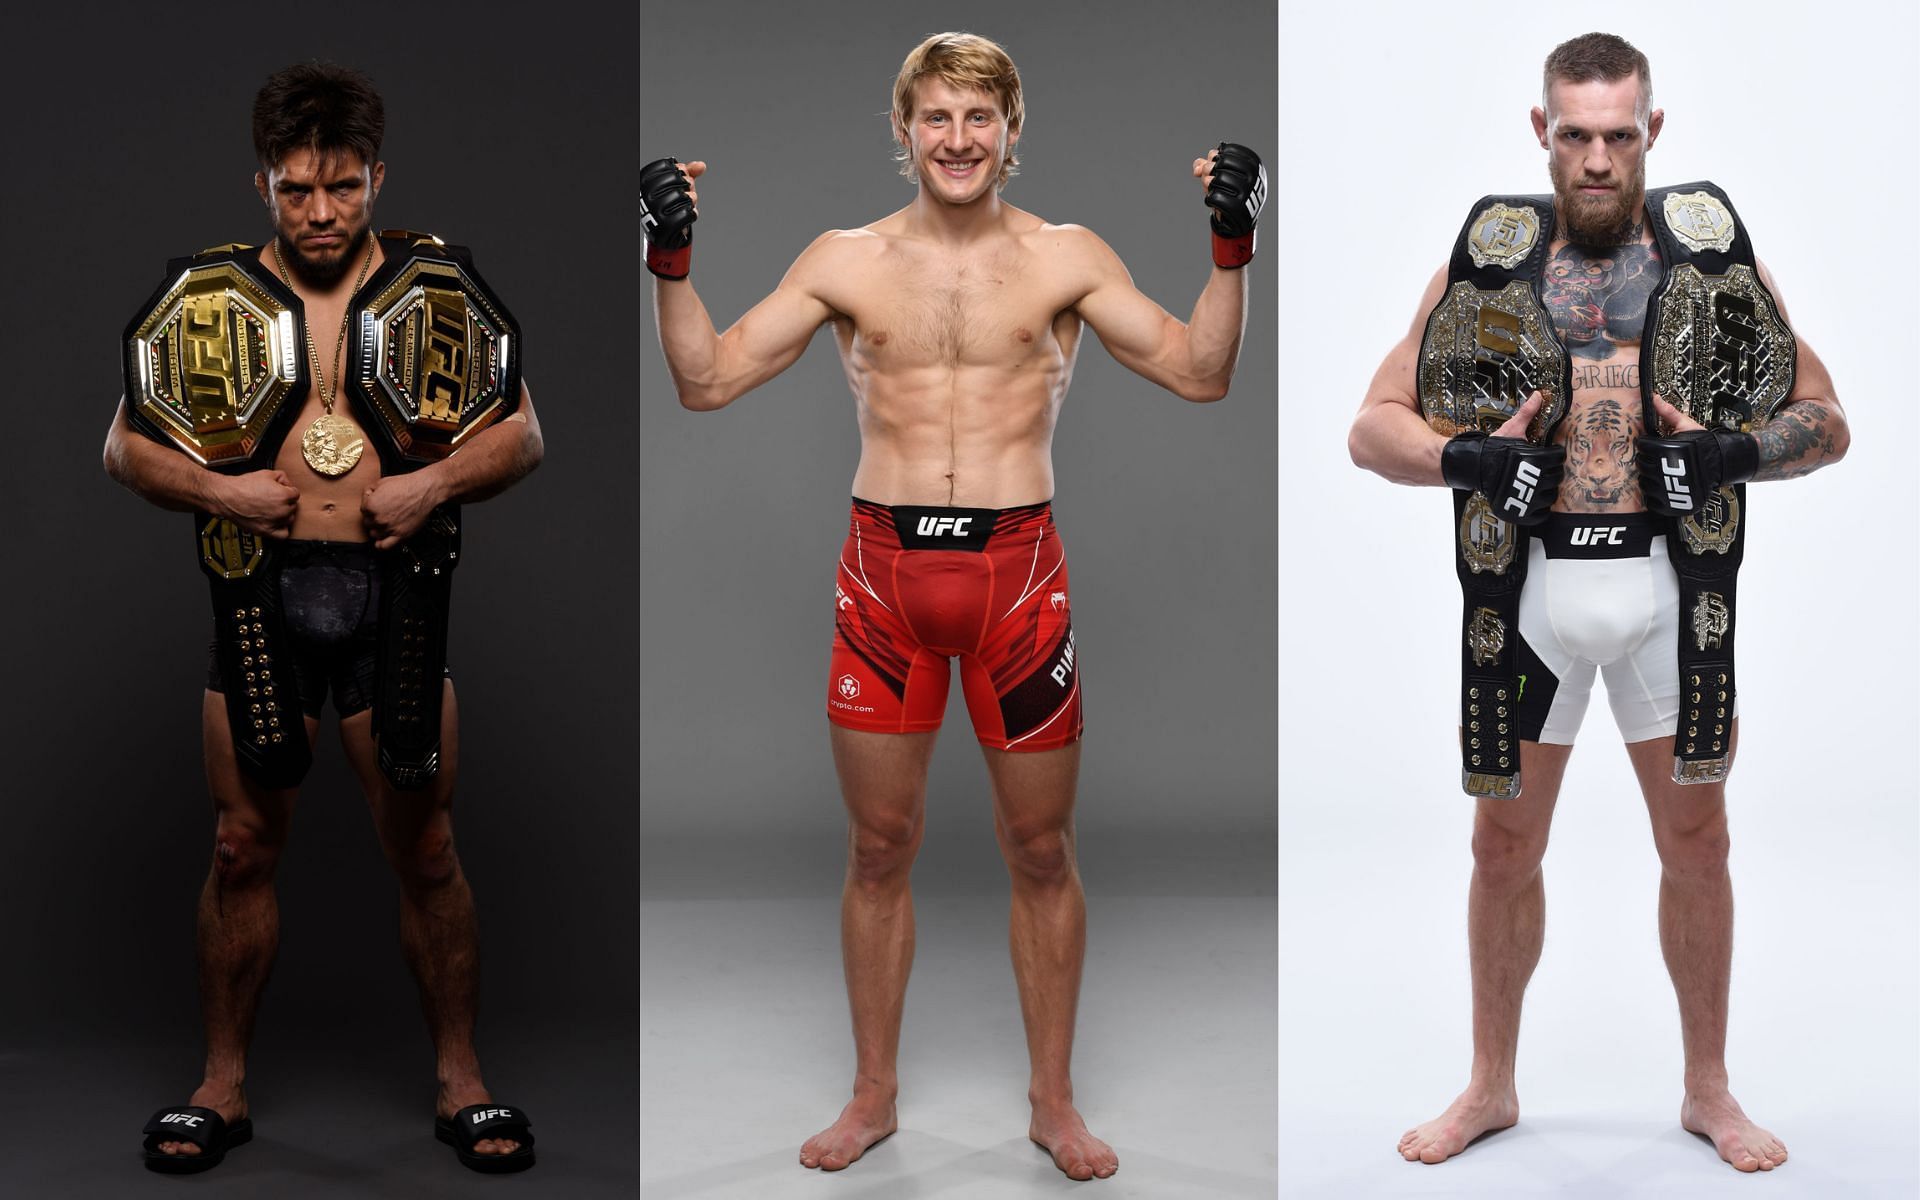 From left to right: Henry Cejudo, Paddy Pimblett, Conor McGregor